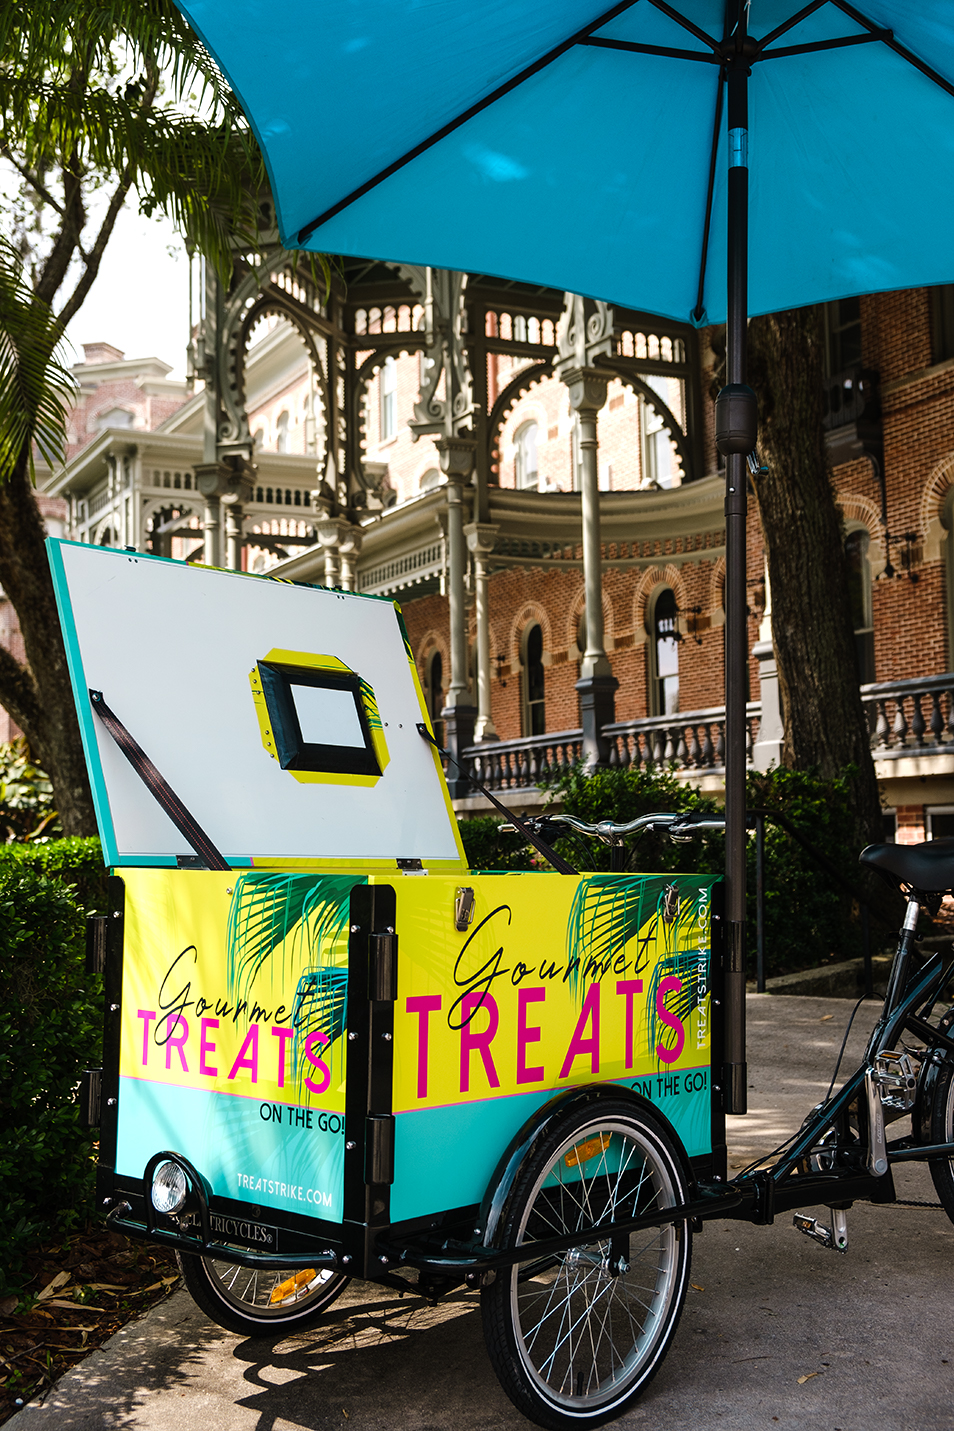 the bicycle used for the Treats Trike business